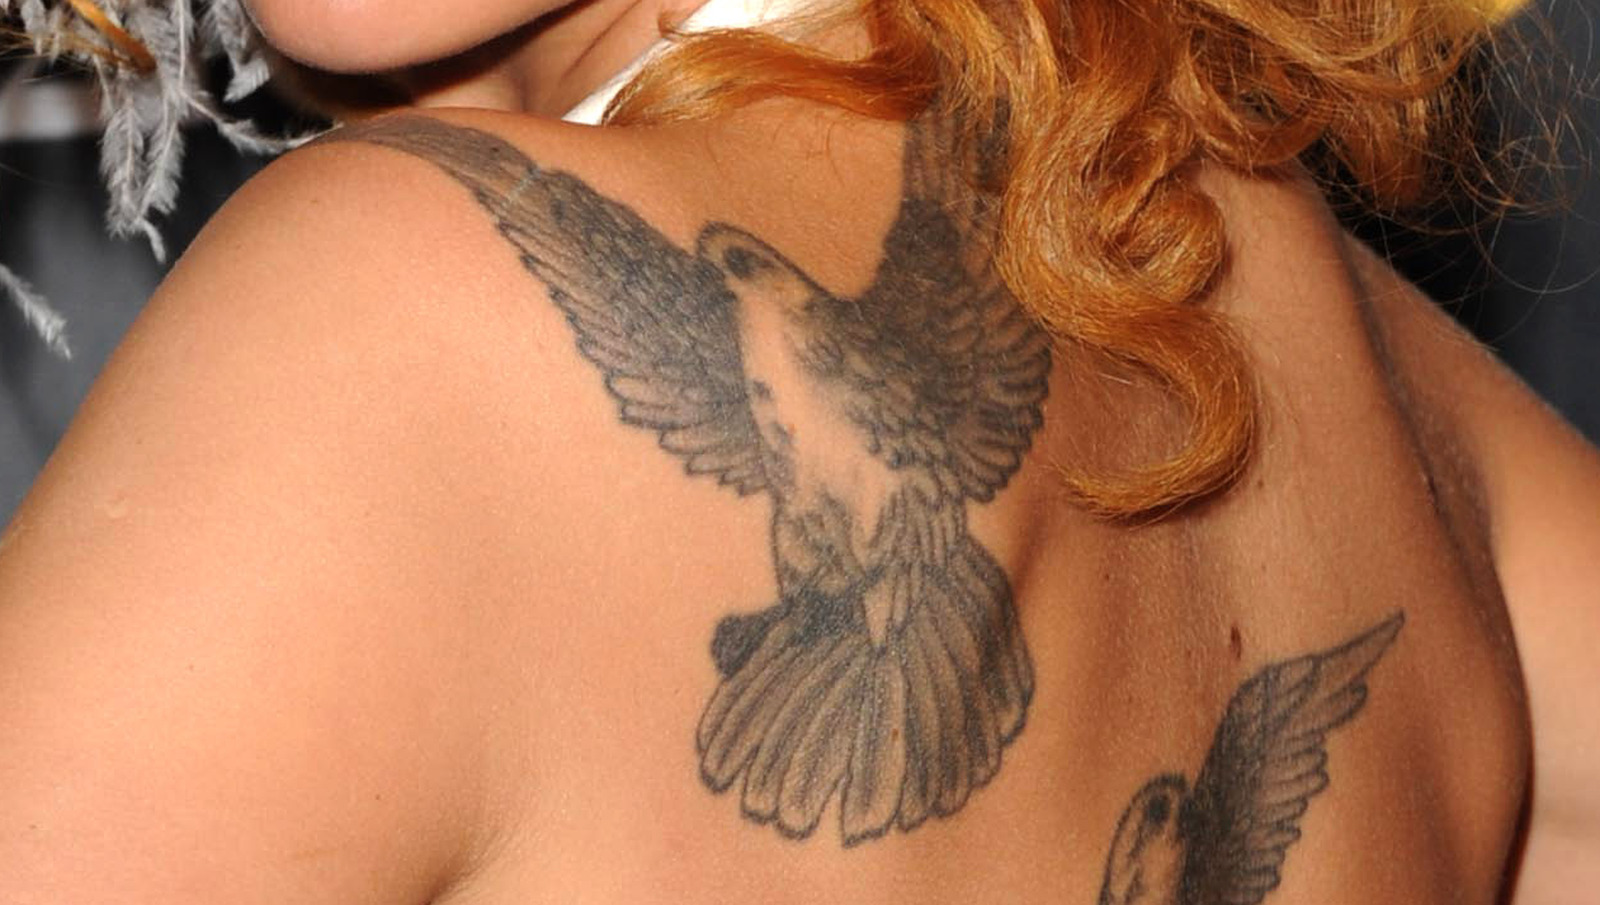 What Does A Dove Tattoo Symbolize?